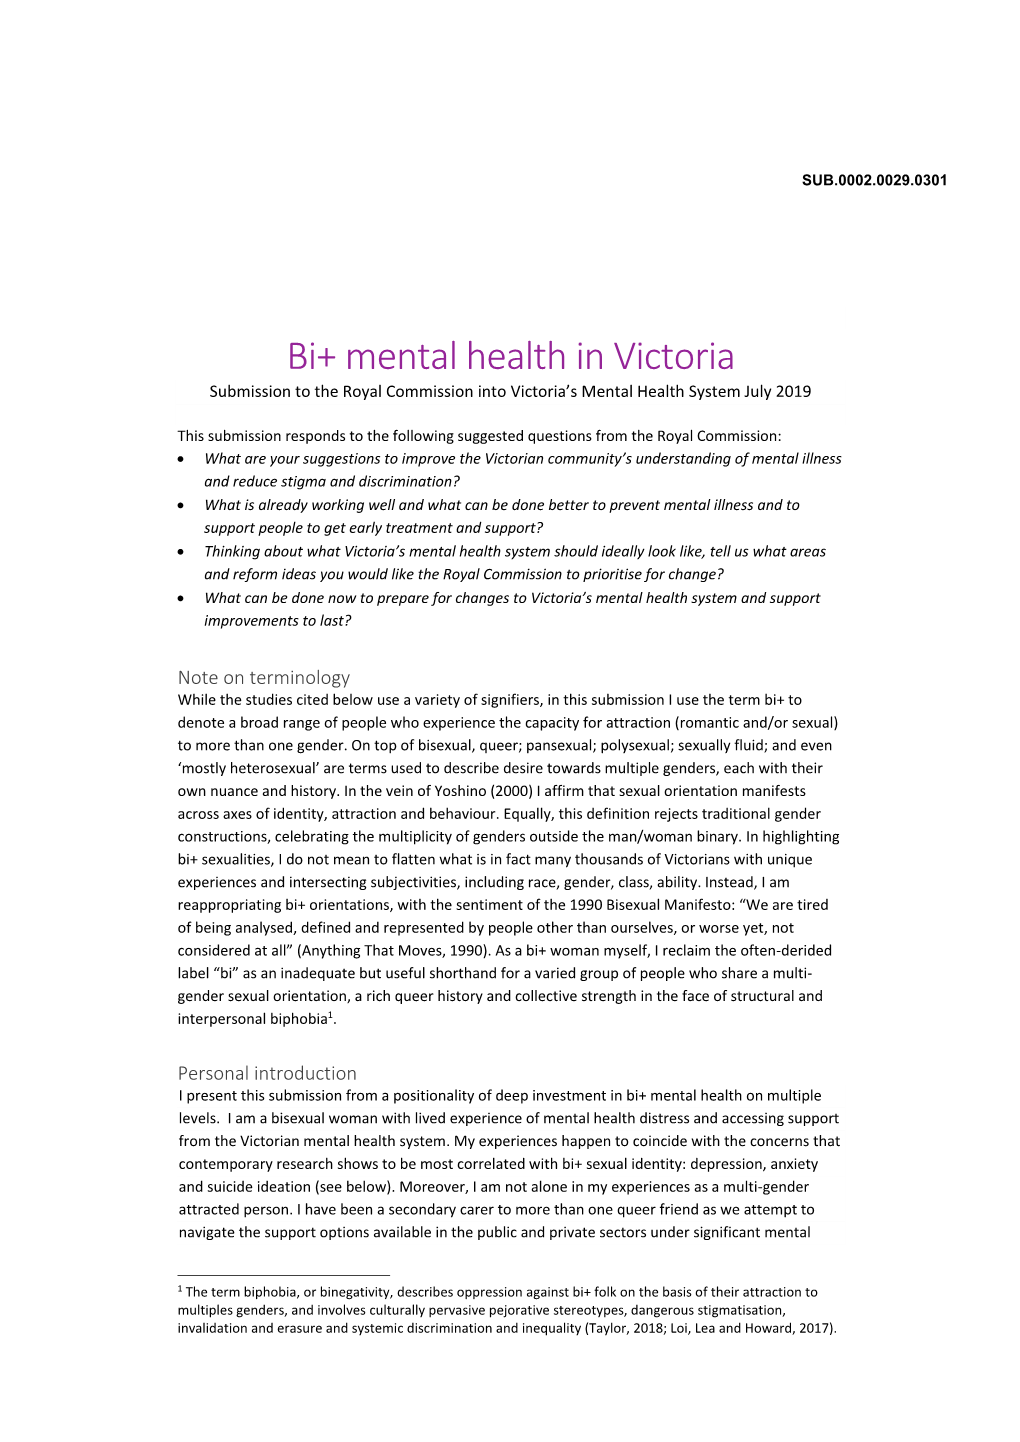 Bi+ Mental Health in Victoria Submission to the Royal Commission Into Victoria’S Mental Health System July 2019